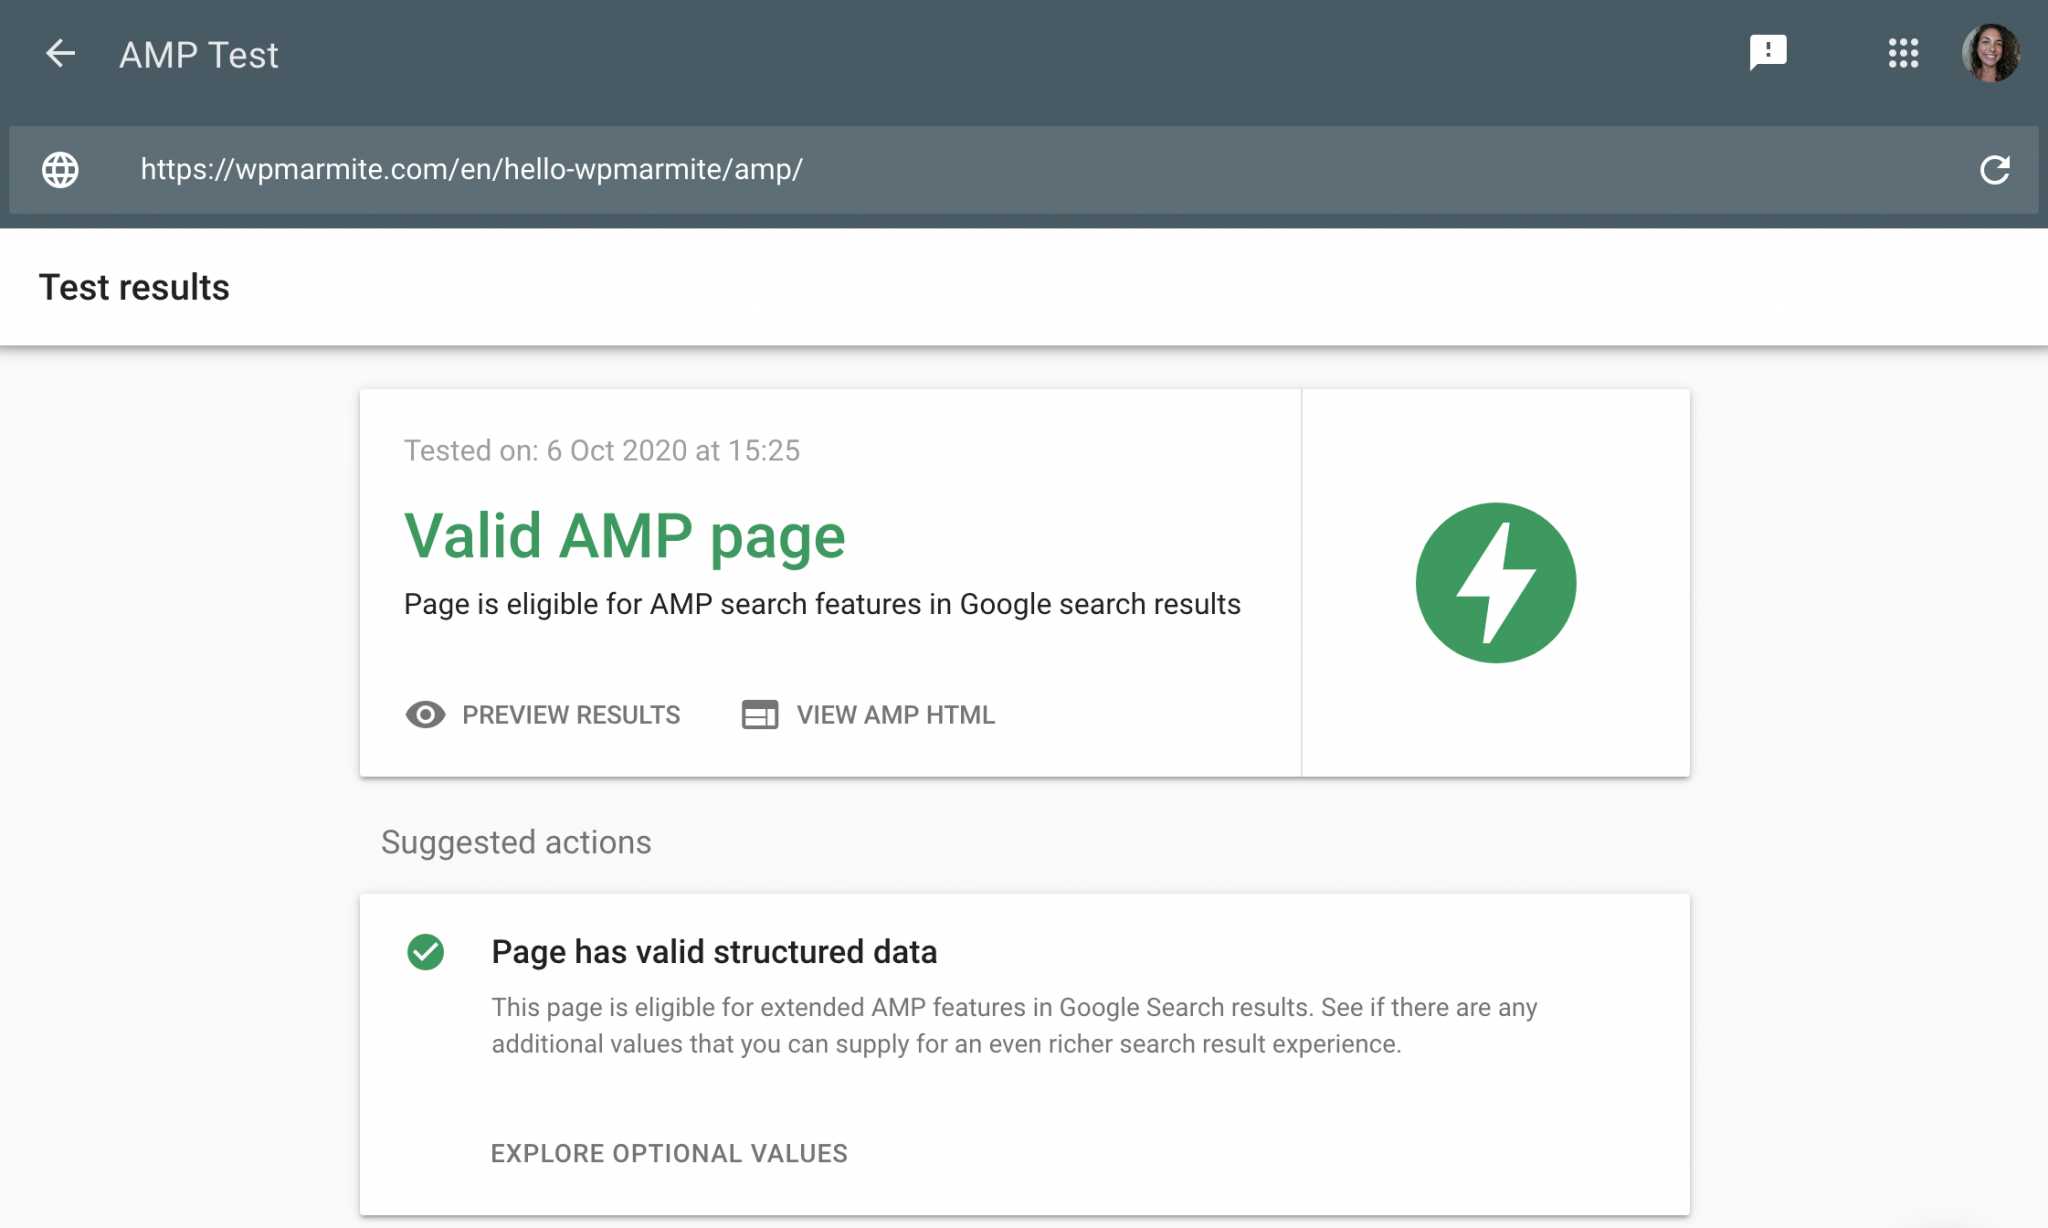 AMP test page via the dedicated Google tool for an article of WPMarmite's blog